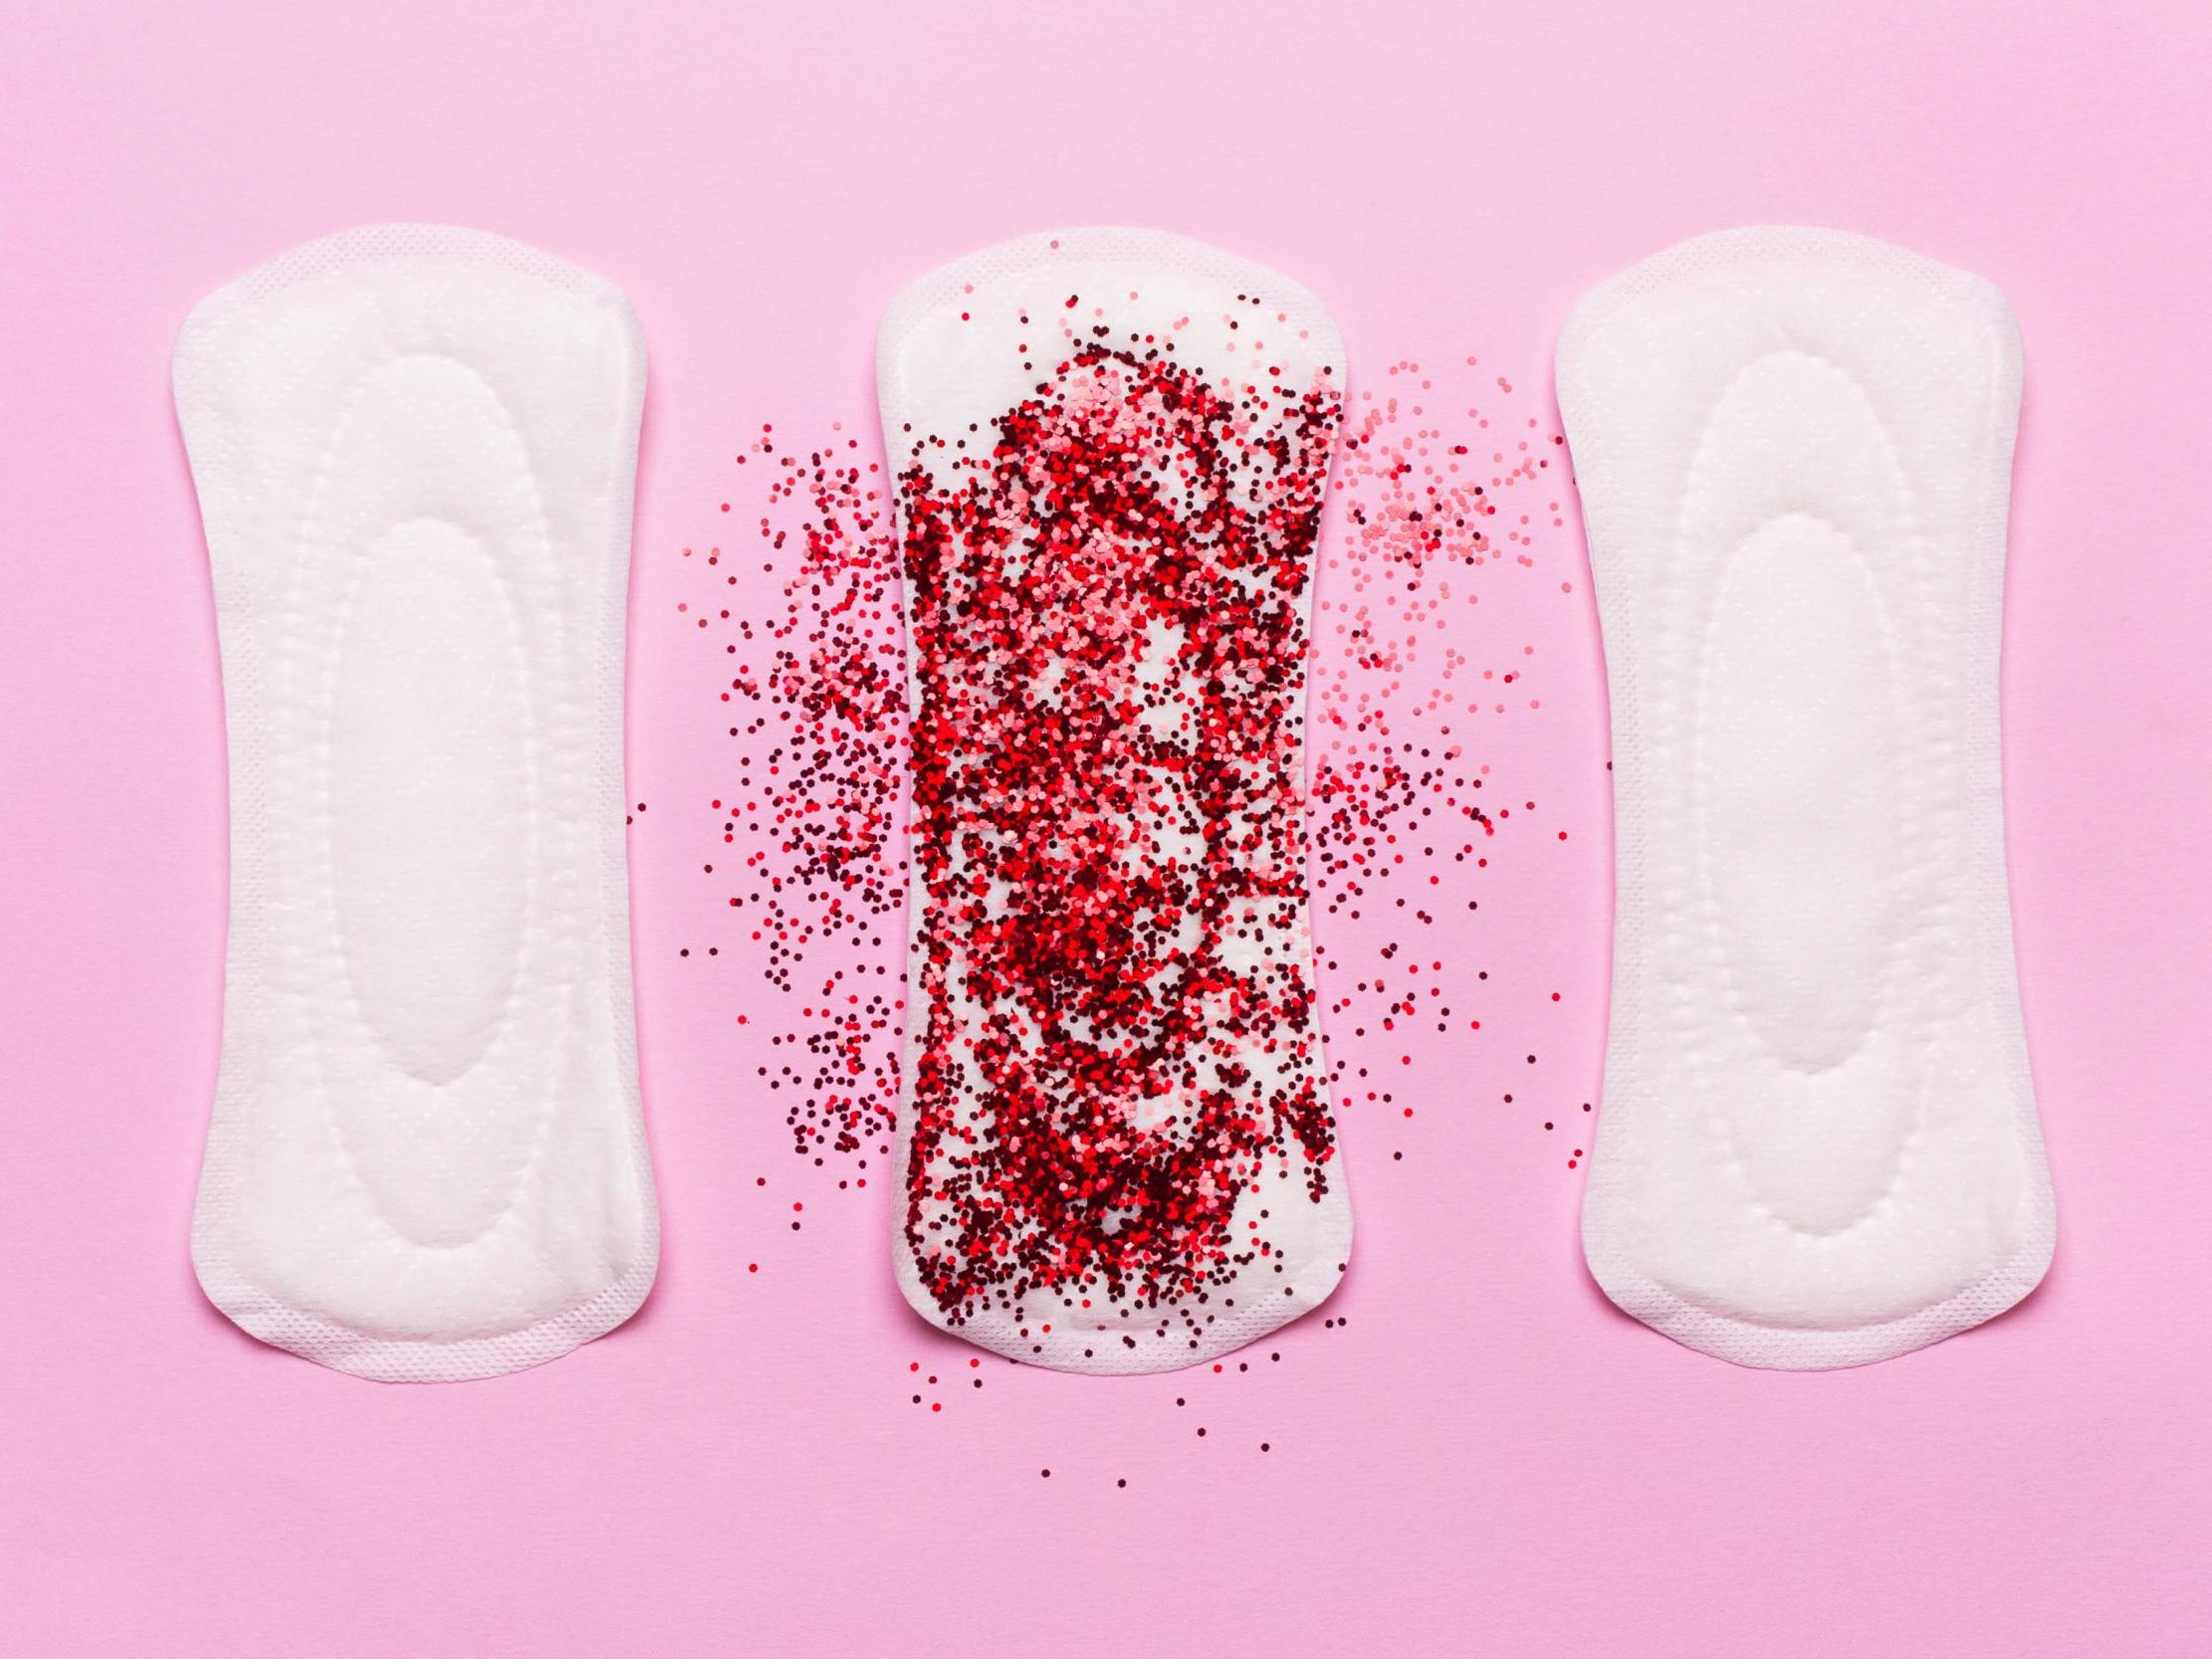 How to make the most of your menstrual cycle